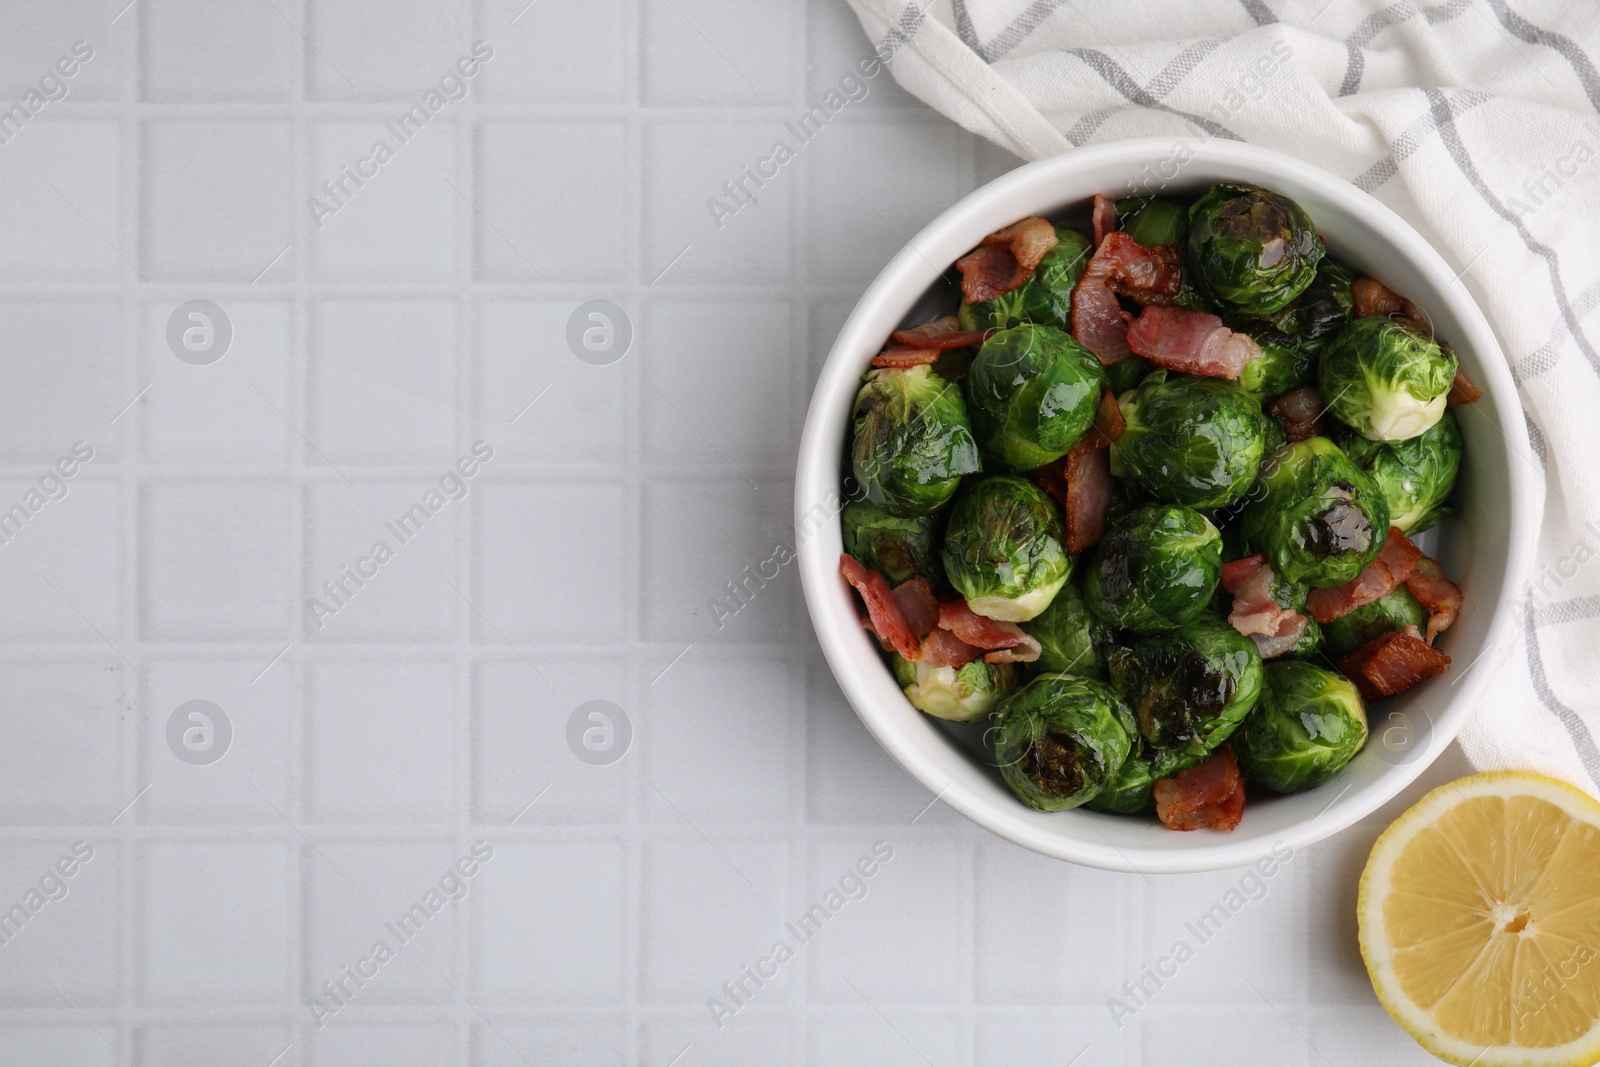 Photo of Delicious roasted Brussels sprouts, bacon and lemon on white tiled table, top view. Space for text